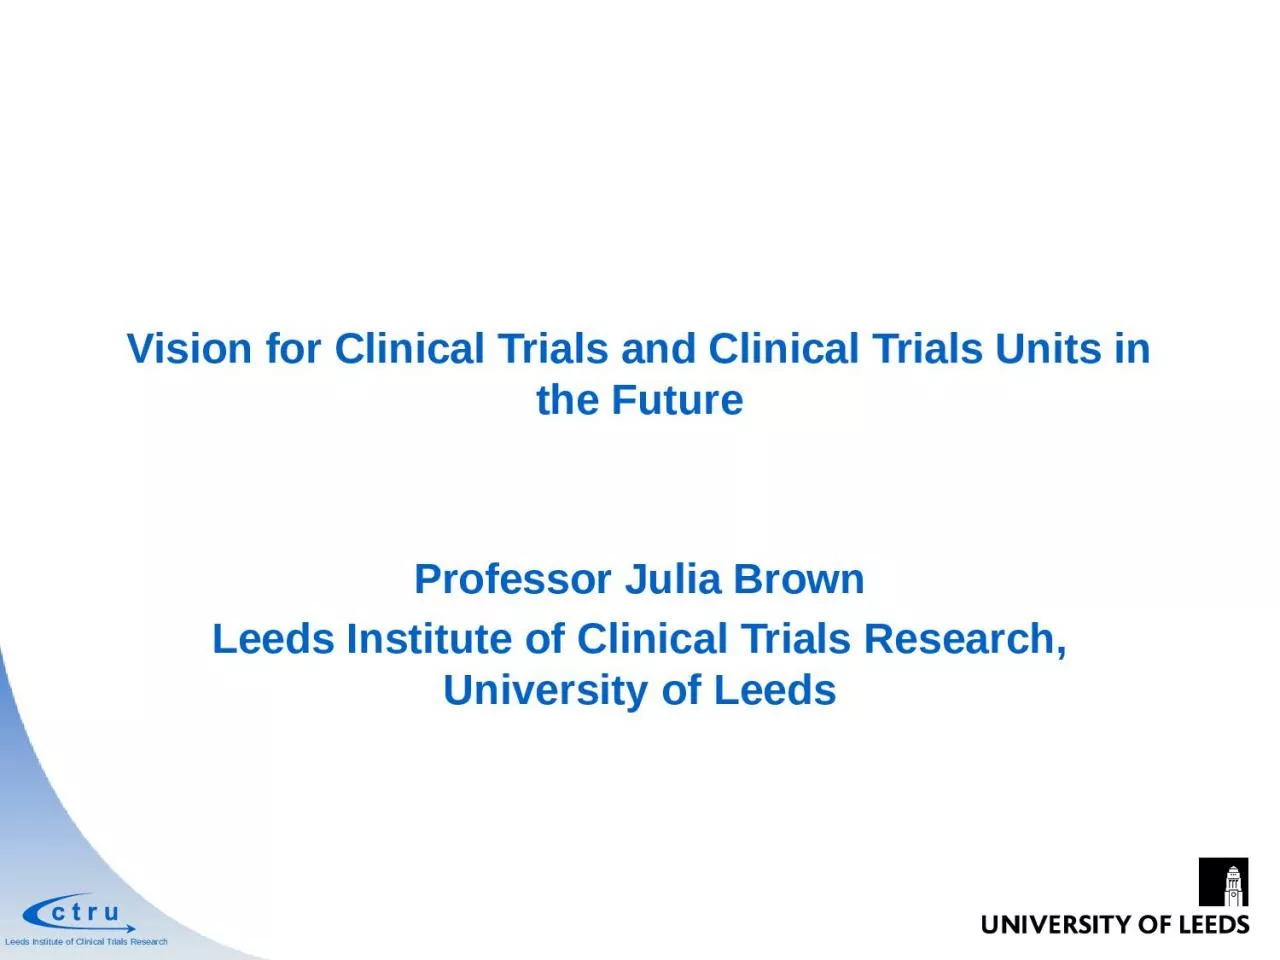 Vision for Clinical Trials and Clinical Trials Units in the Future